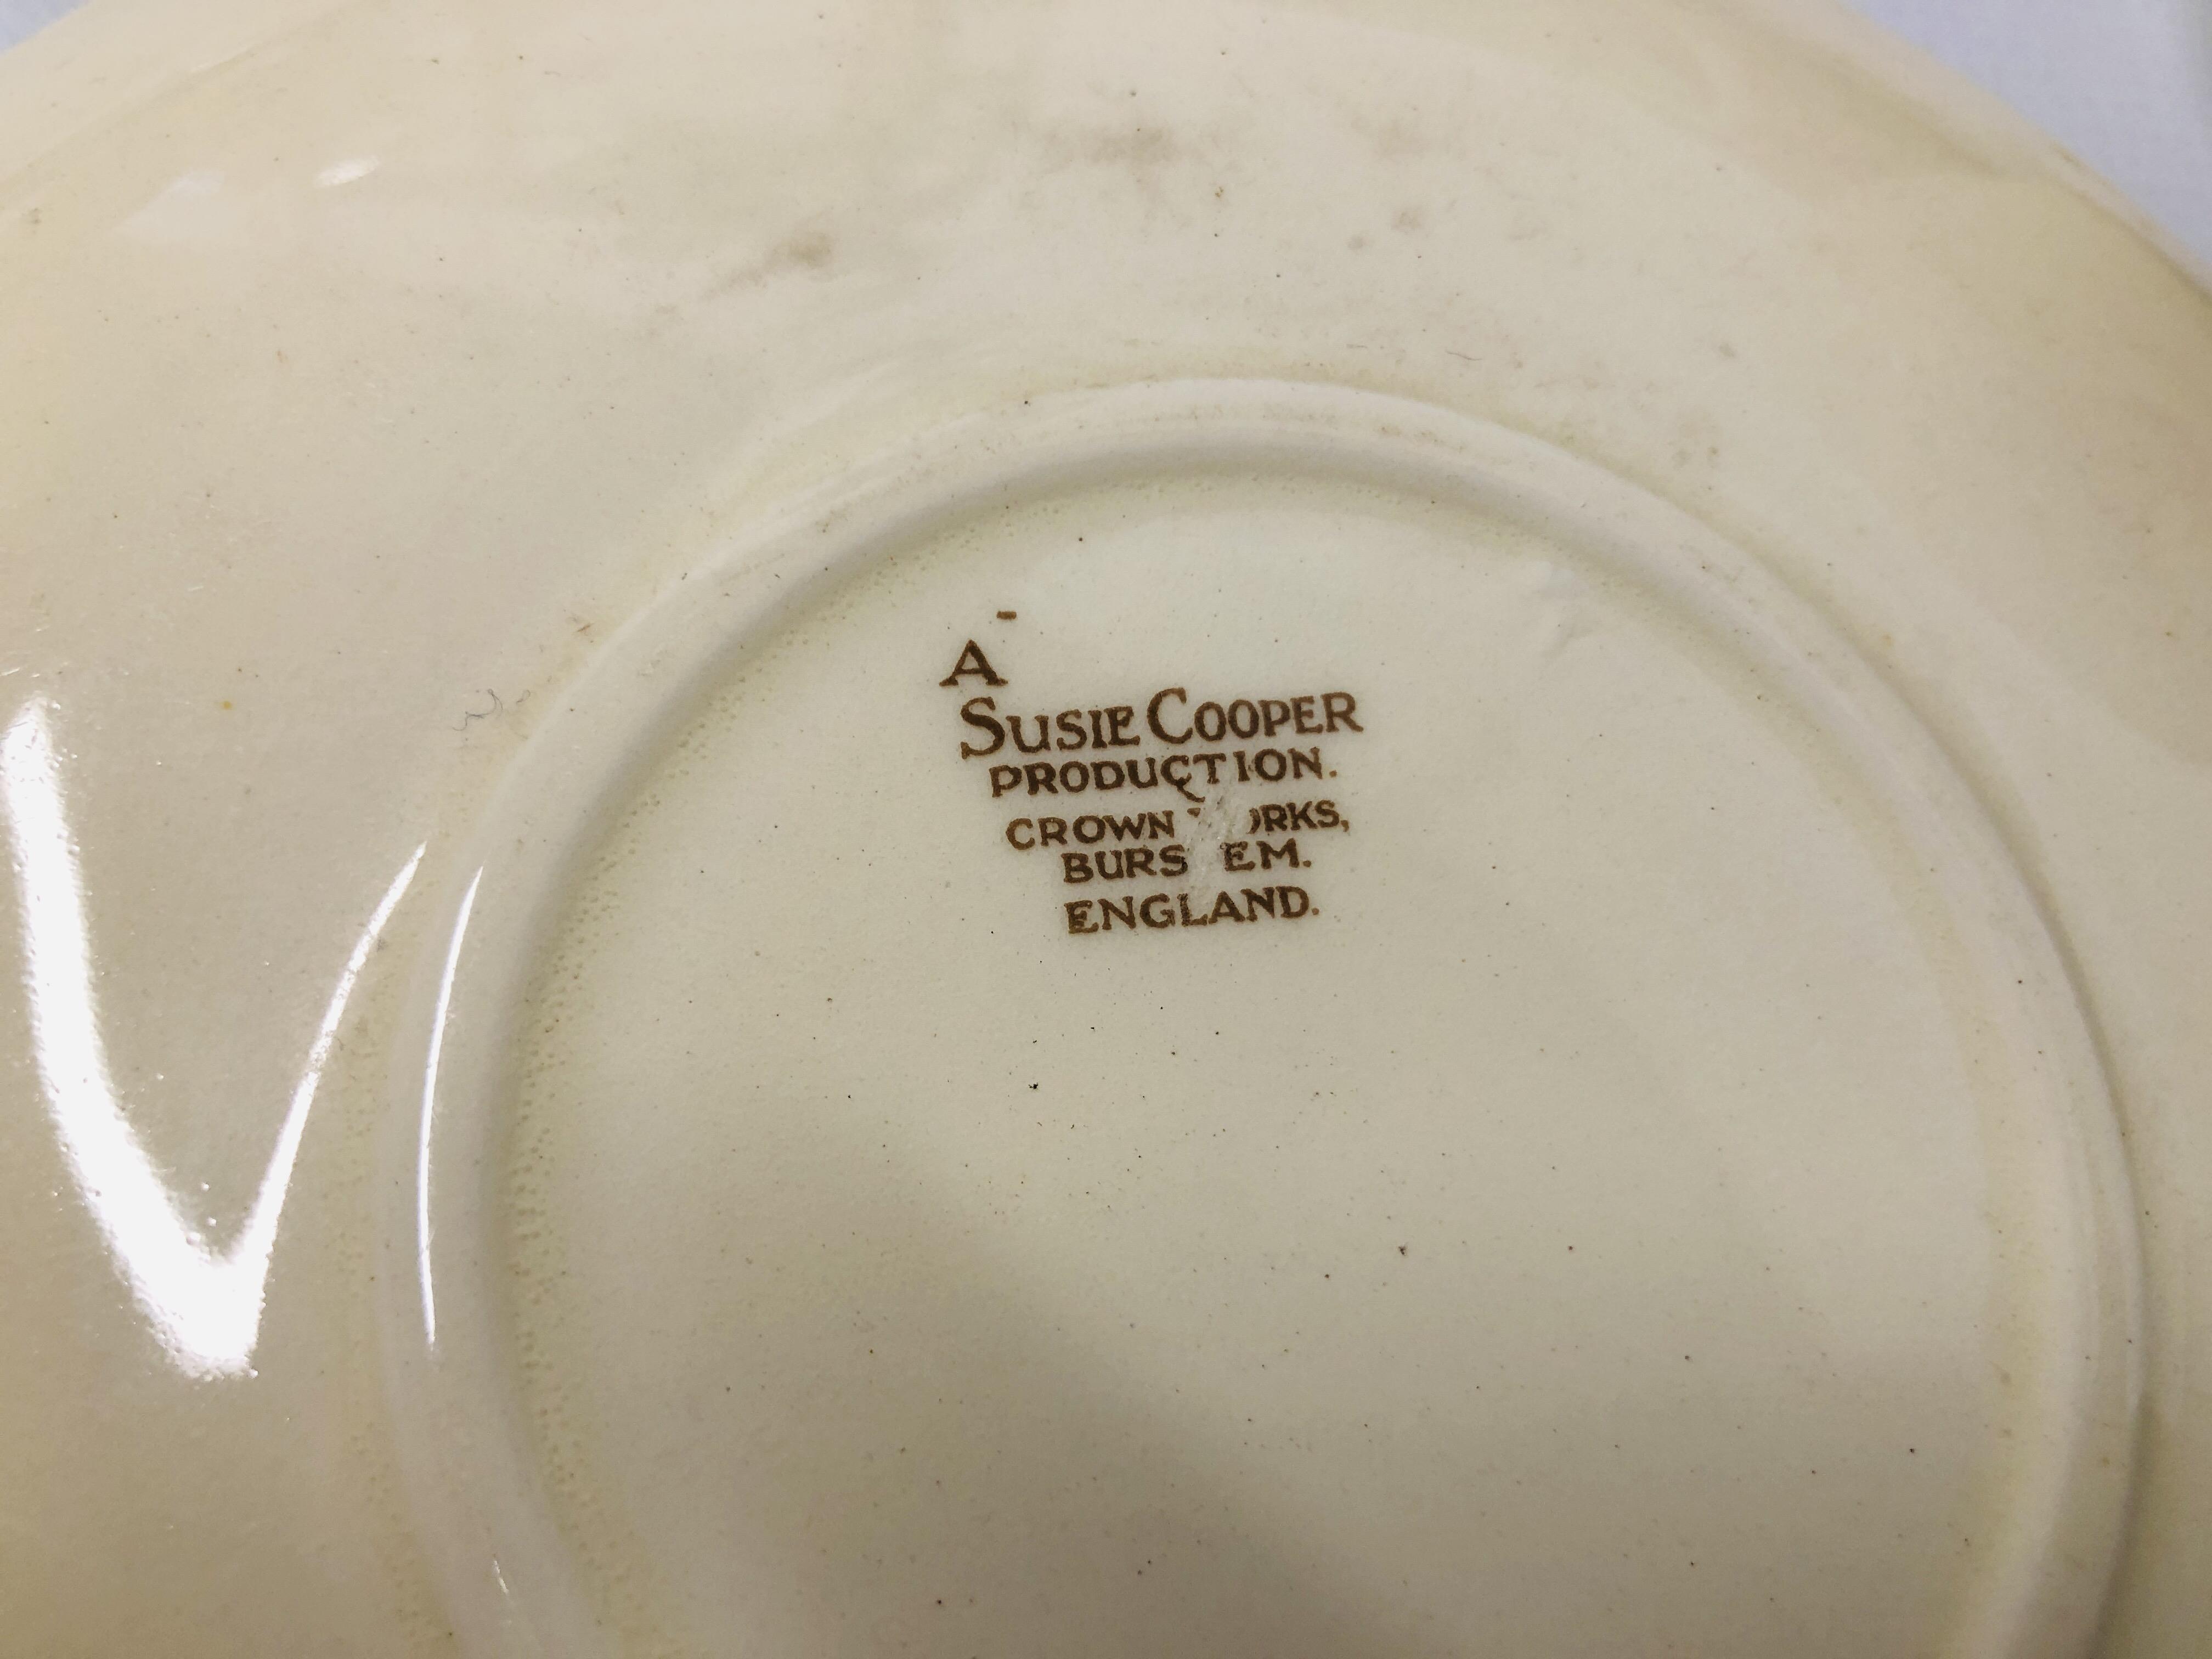 COLLECTION OF SUSIE COOPER TEA AND DINNERWARE - Image 19 of 20